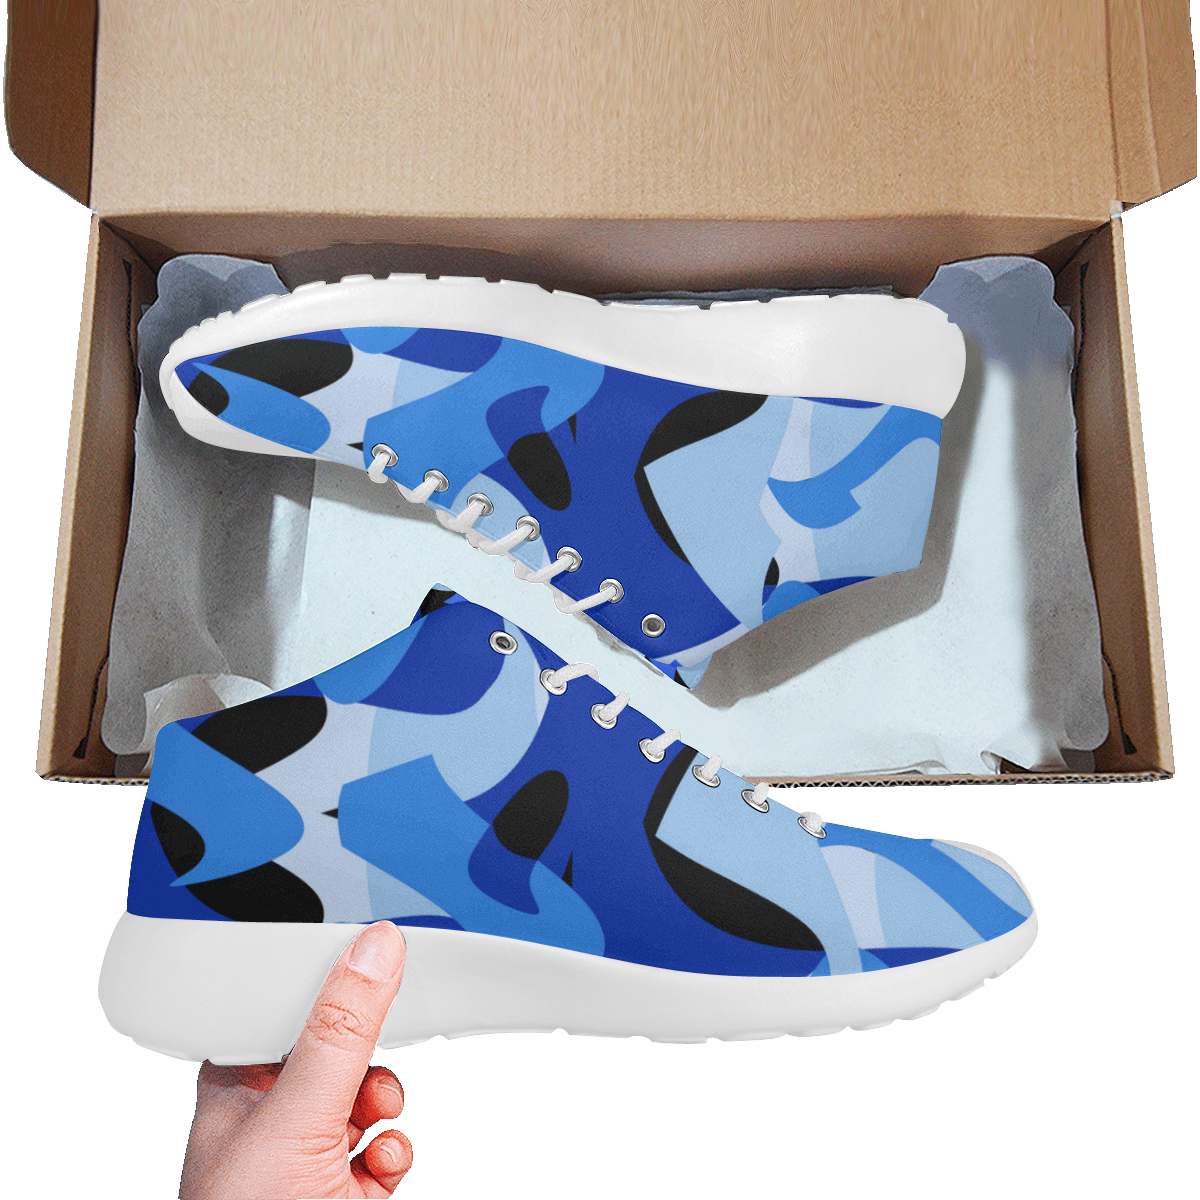 Camouflage Abstract Blue and Black Women's Basketball Training Shoes/Large Size (Model 47502)